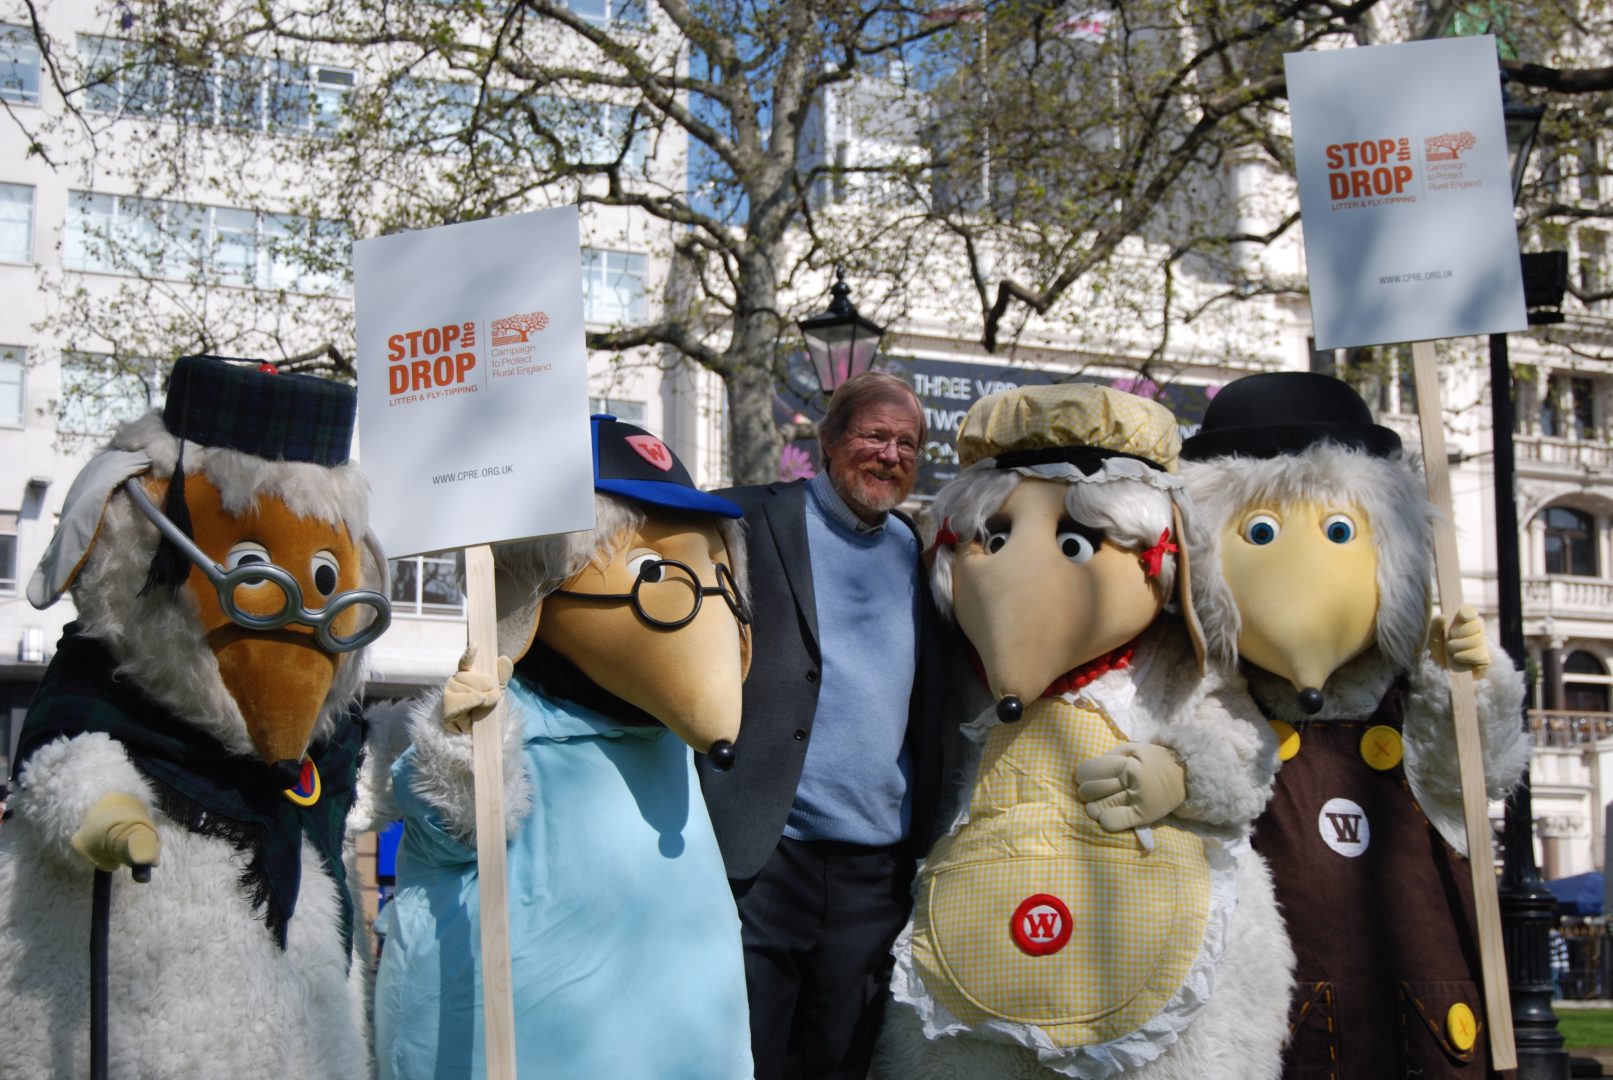 Bill Bryson and wombles with Stop the Drop placards